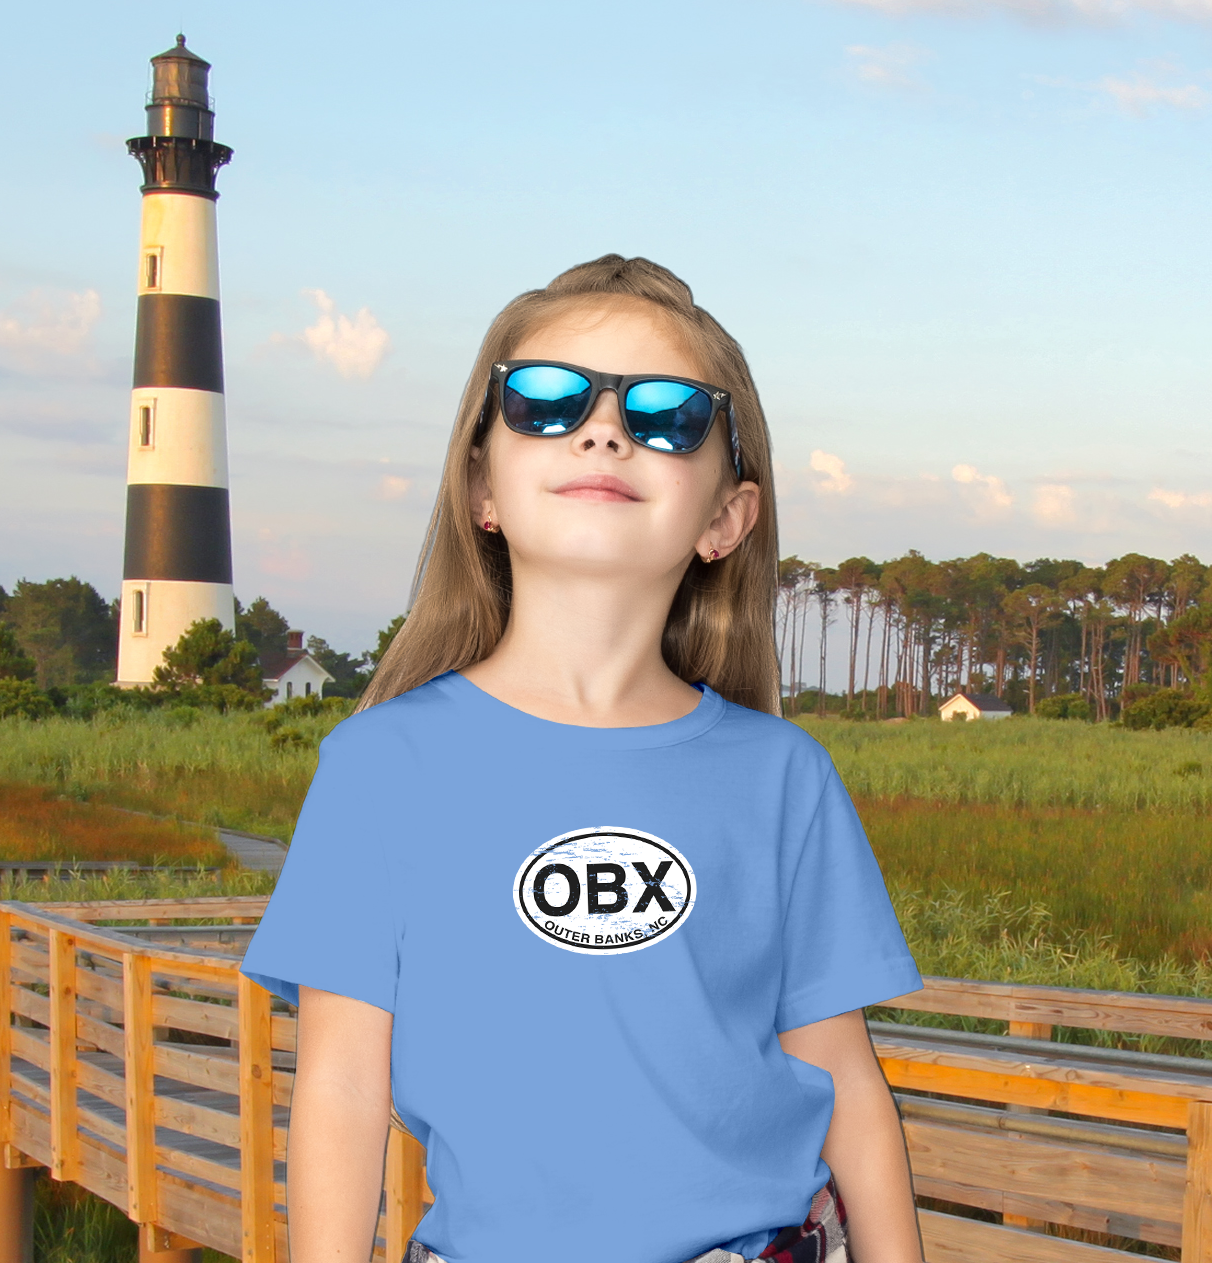 Outer Banks Classic Youth T-Shirt Gift Souvenir - My Destination Location